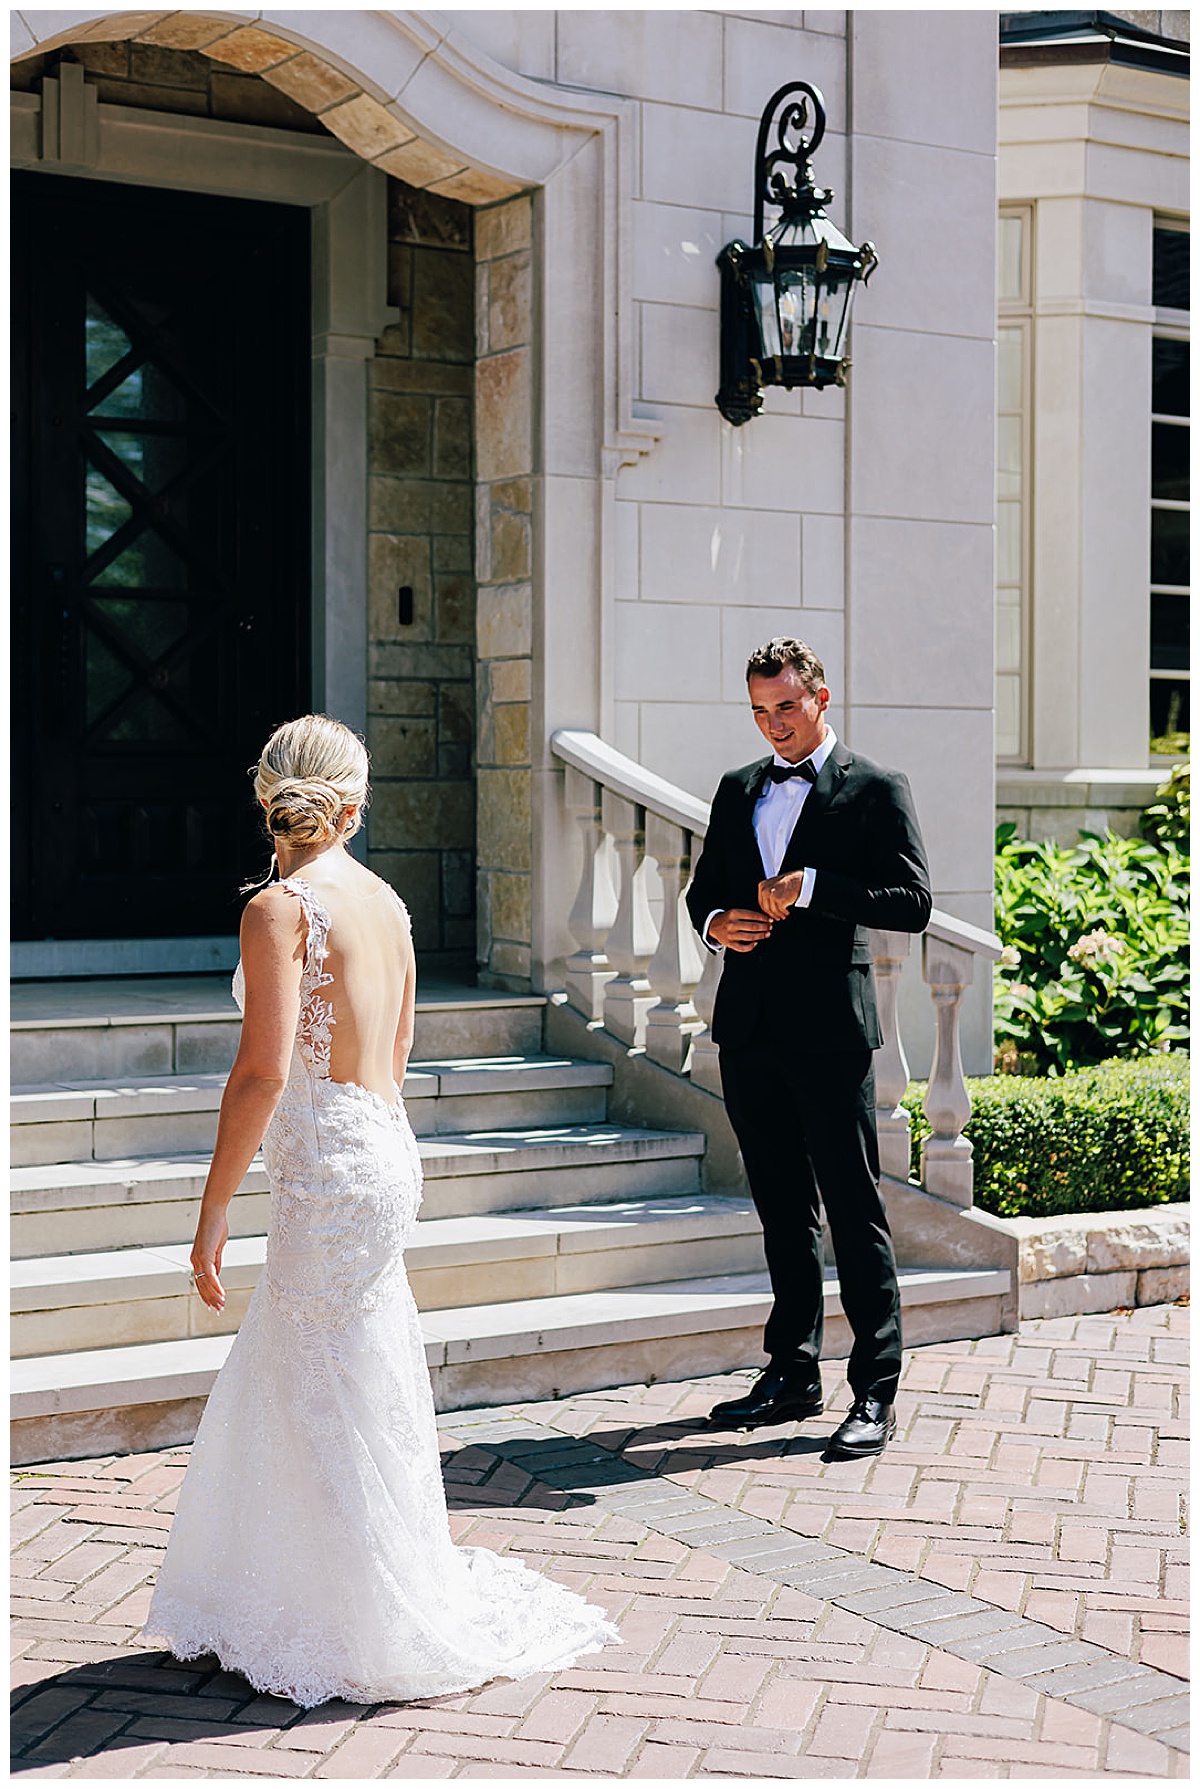 Guy sees girl in wedding gown for Detroit Wedding Photographer